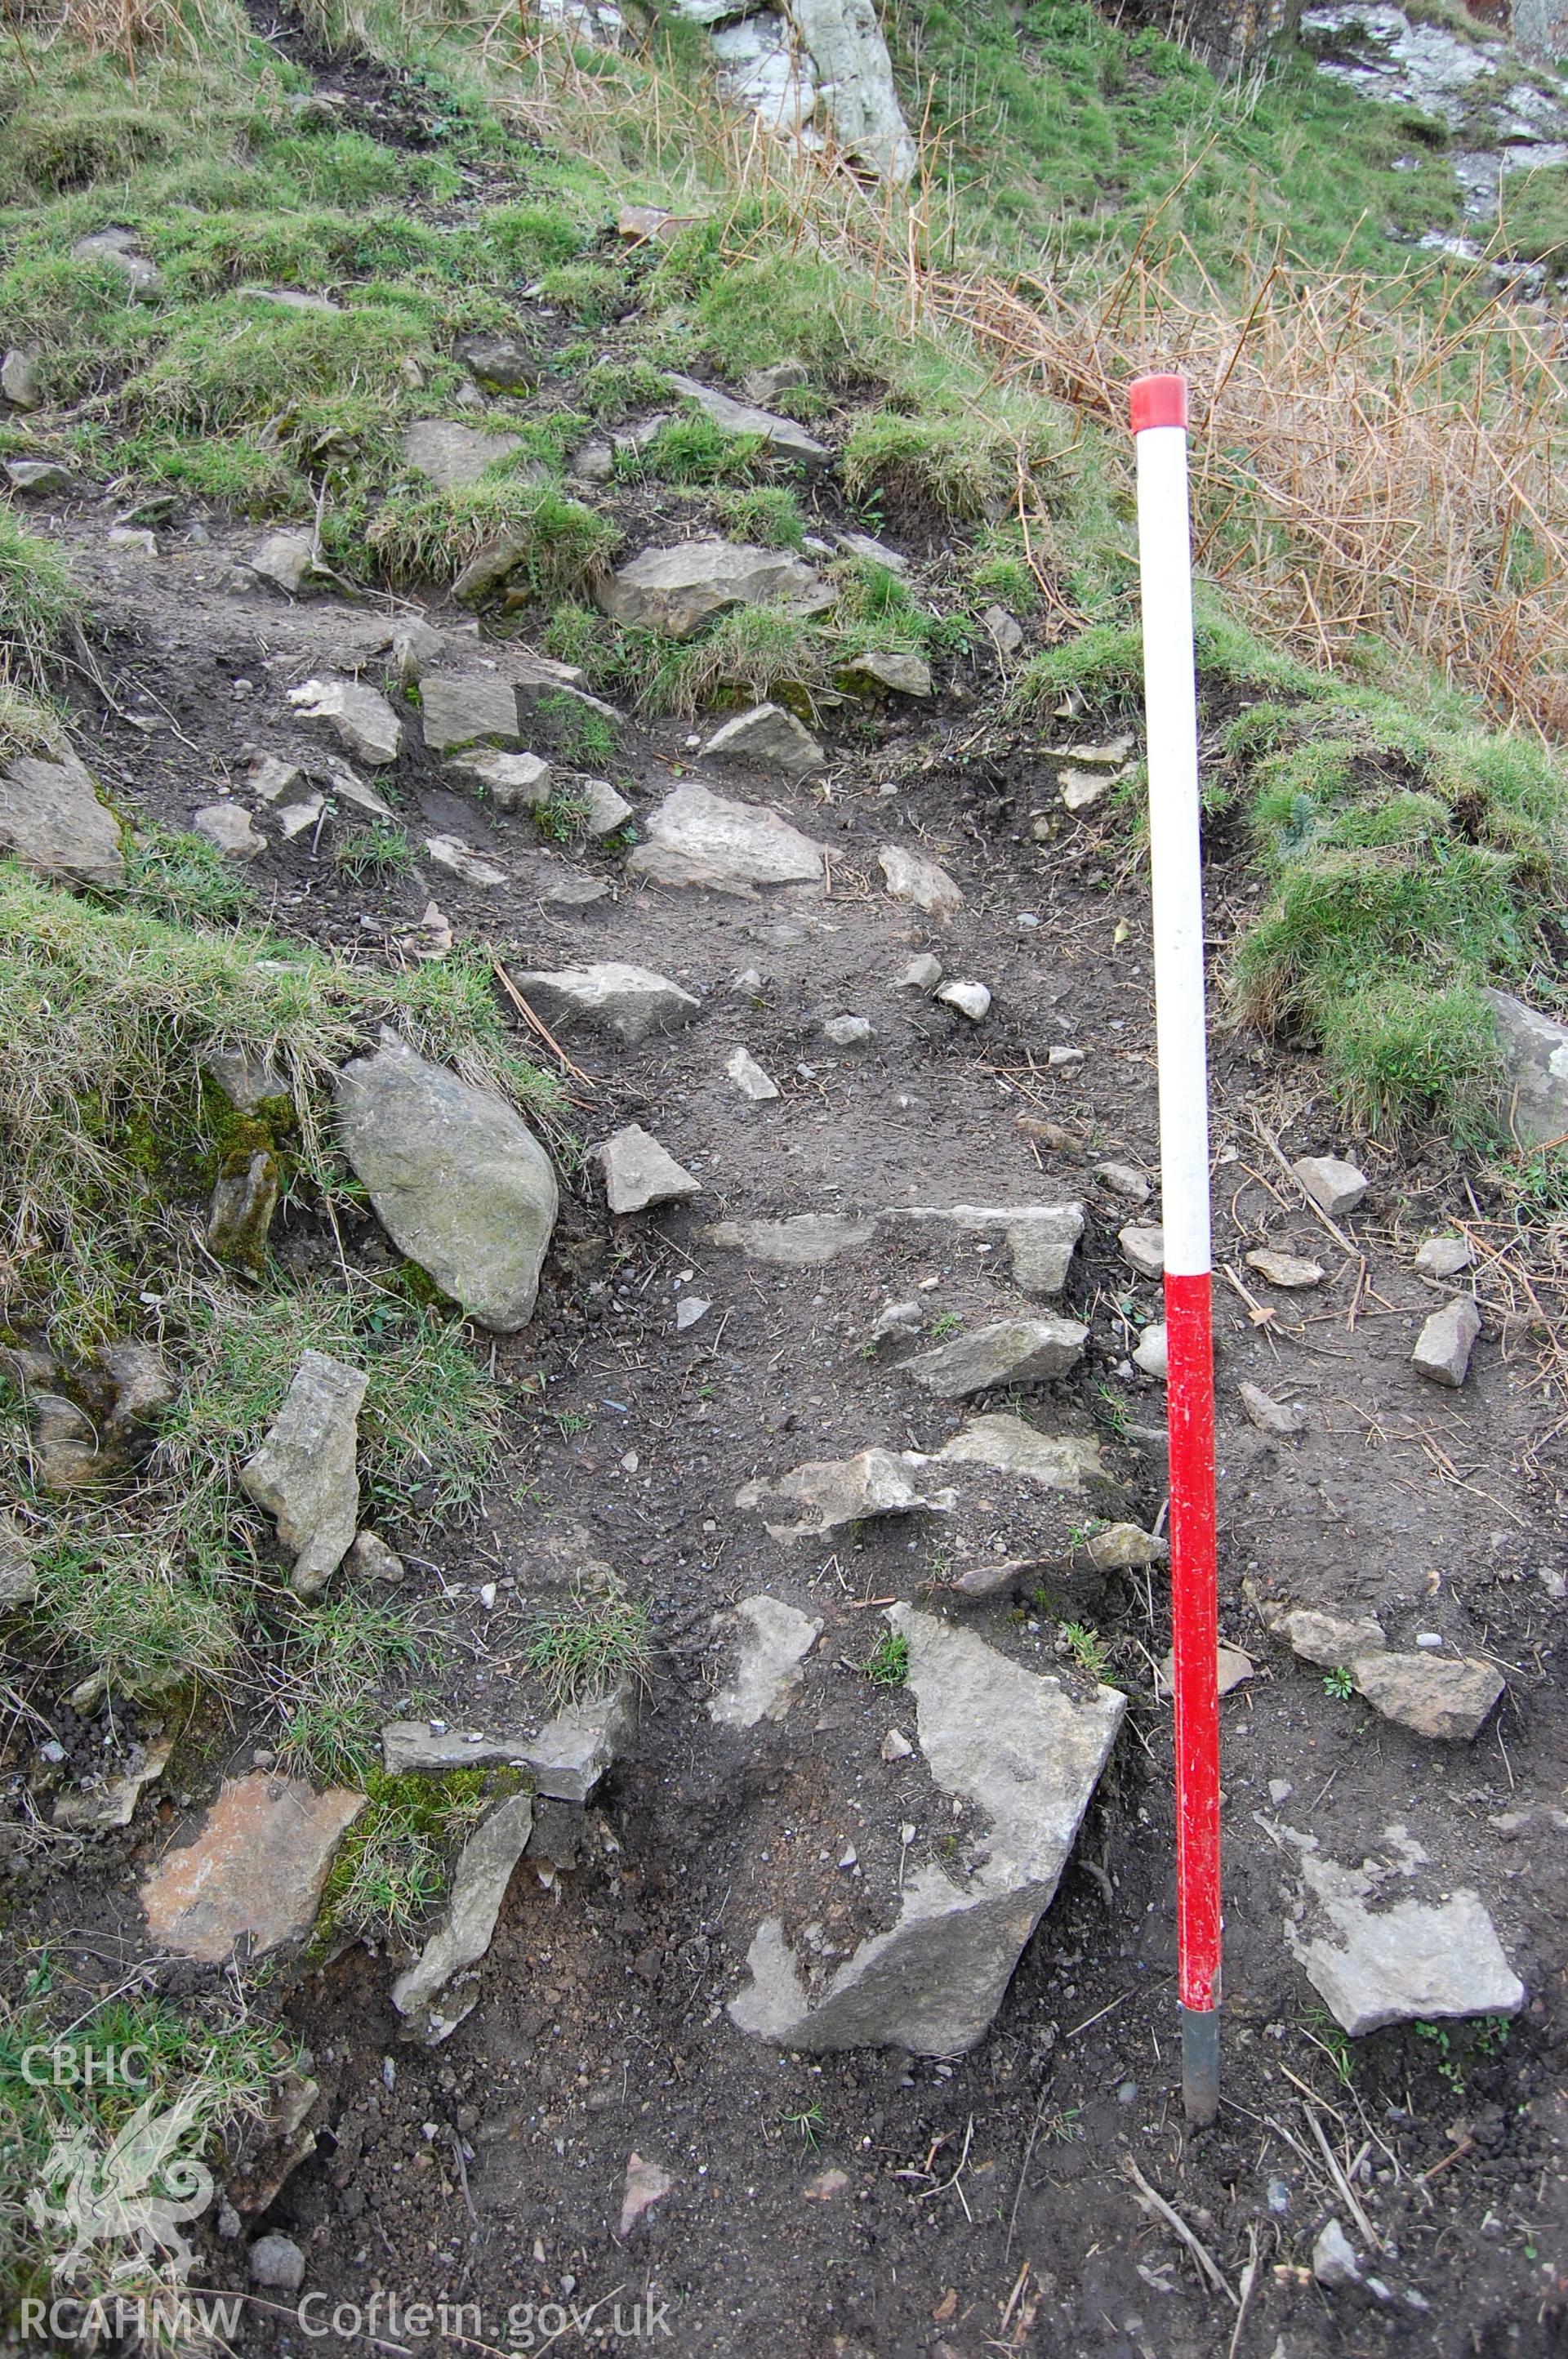 Digital photograph from an archaeological assessment of Deganwy Castle, carried out by Gwynedd Archaeological Trust, 2009. Traces of North wall further down slope.